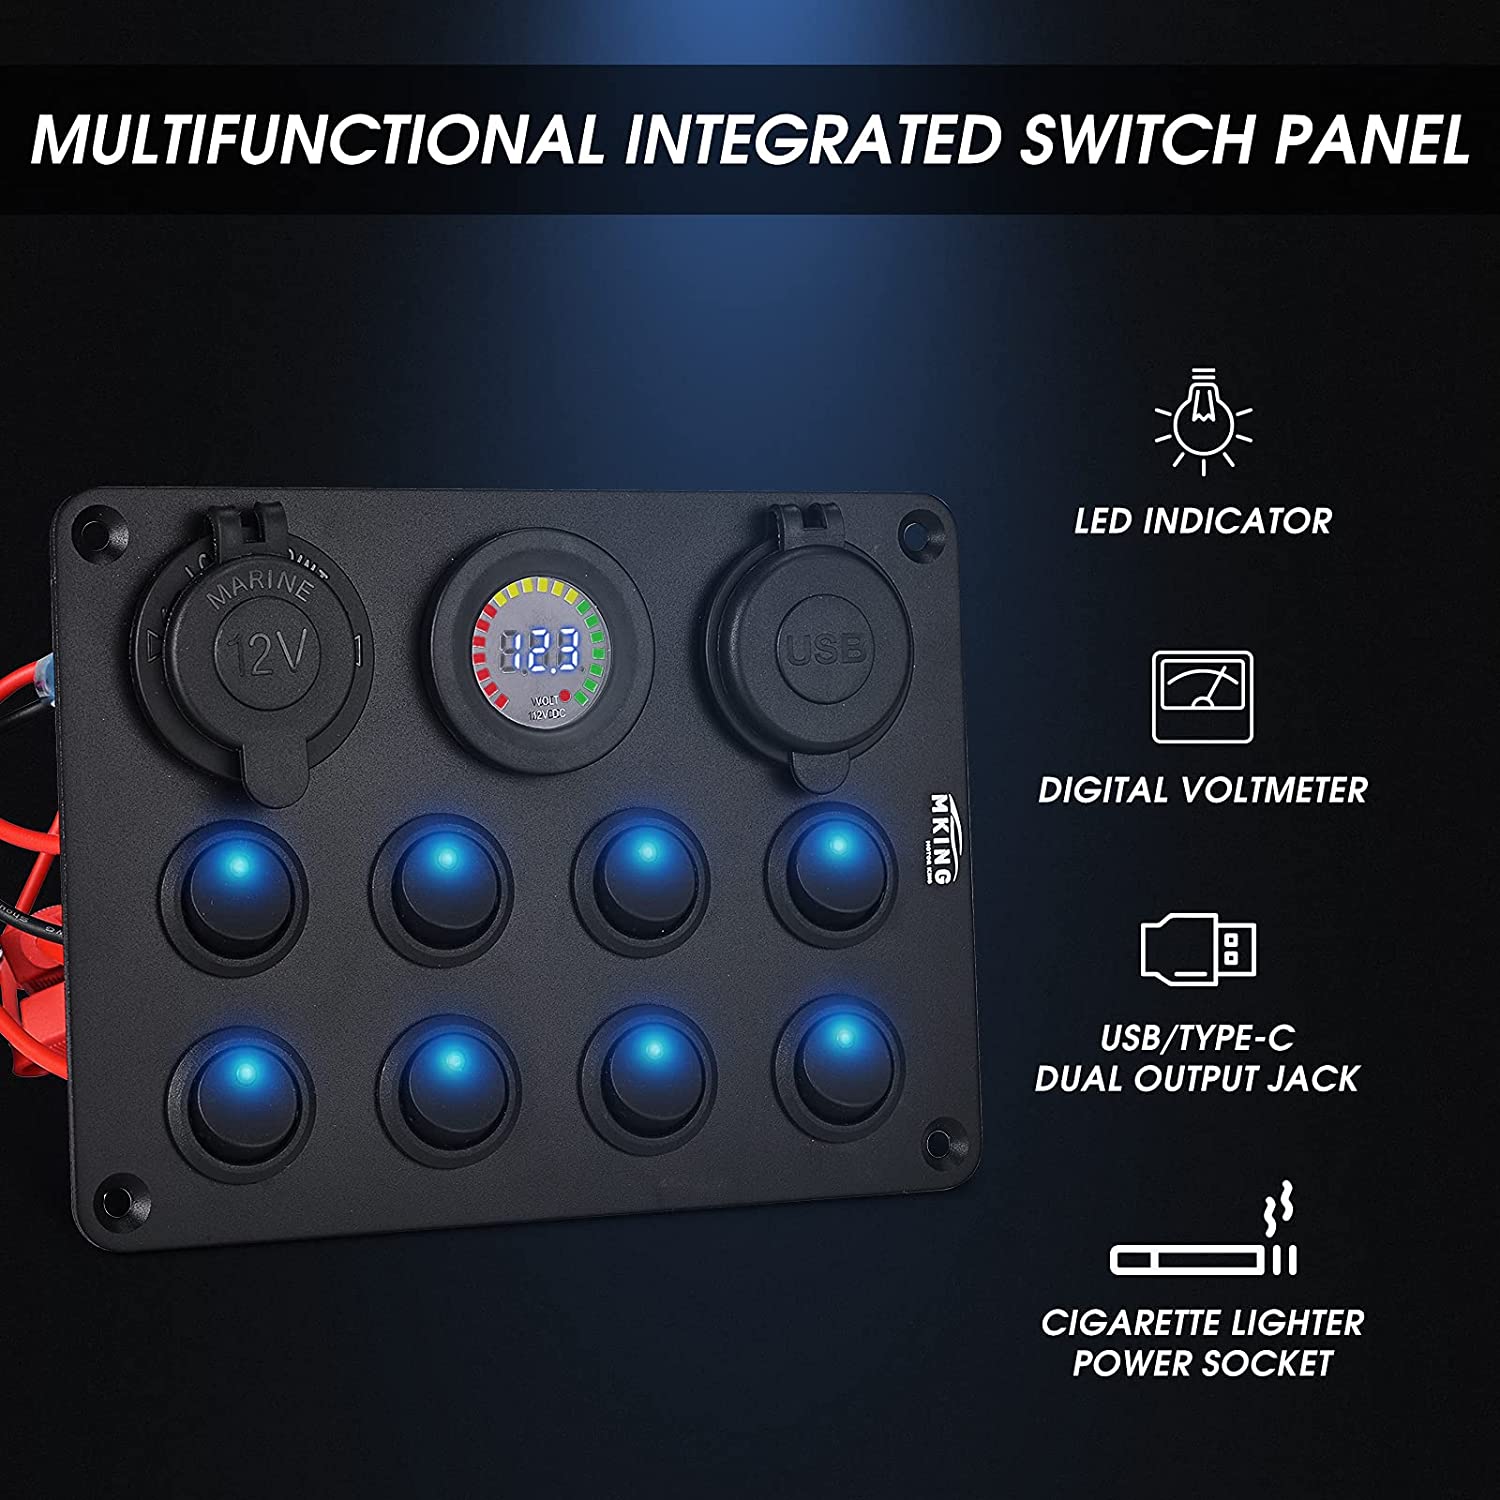 MKING Waterproof Rocker Switch Panel,Multi-Function Gang Switch Panel,Marine  Switch Panel with 12V Voltmeter, USBType-C and 12 Volt Socket,Aluminum Switch  Panel for RV Boat Truck.